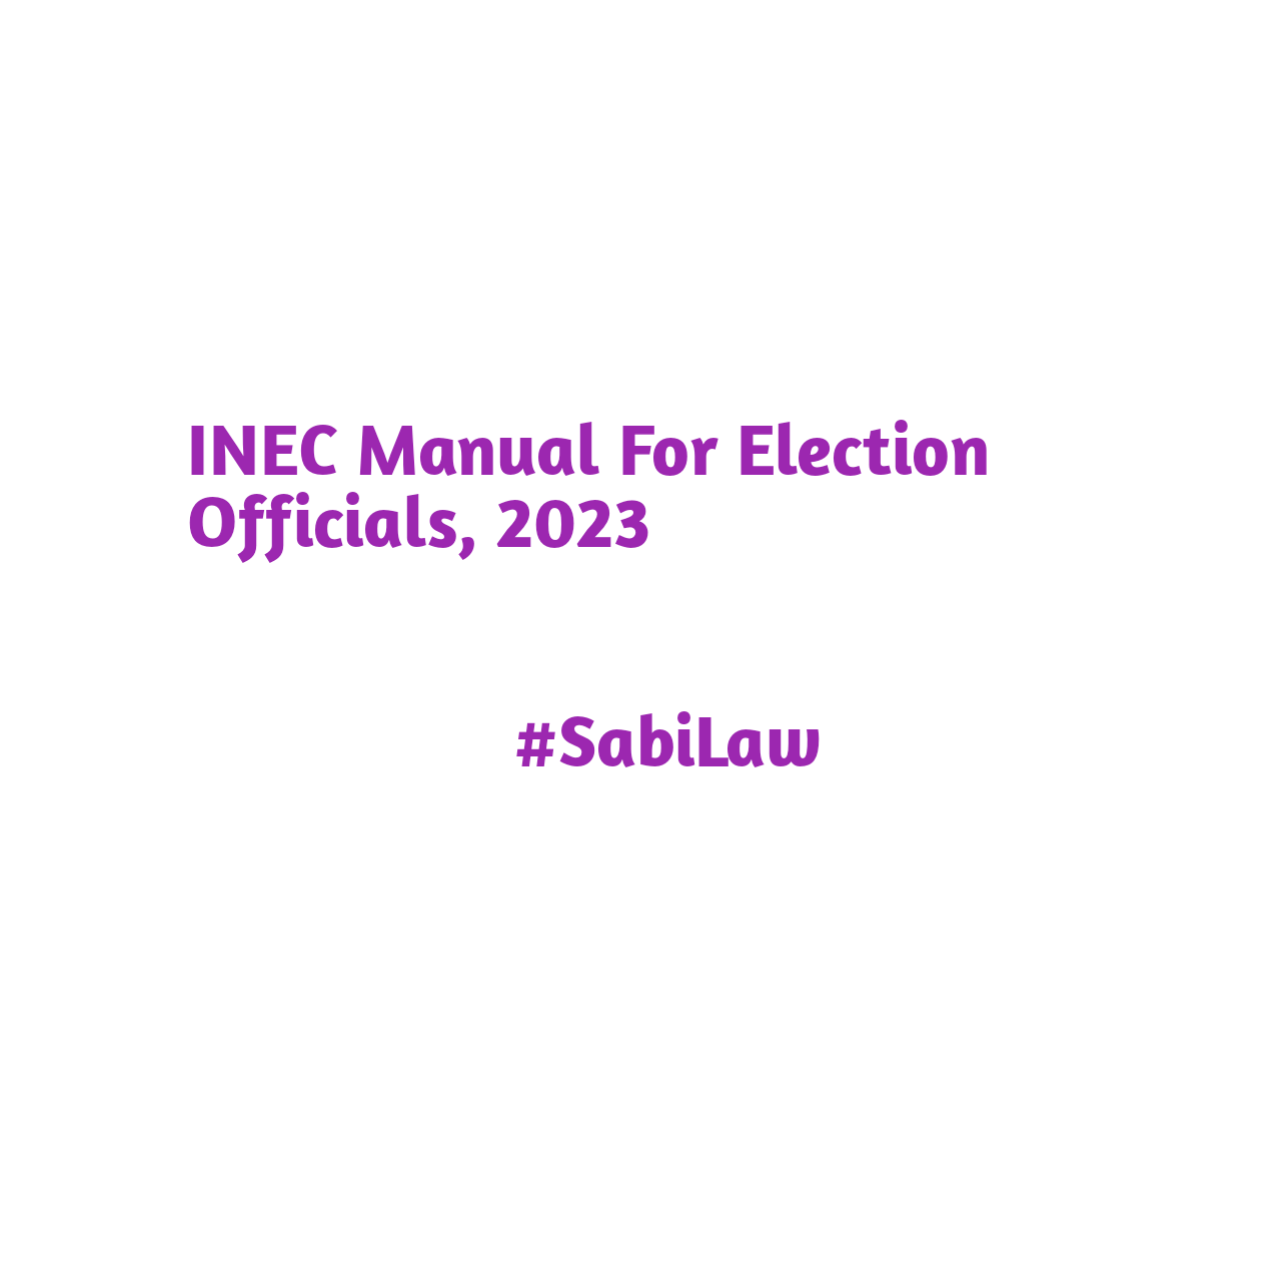 Click to download a copy of the INEC Manual For Election Officials, 2023